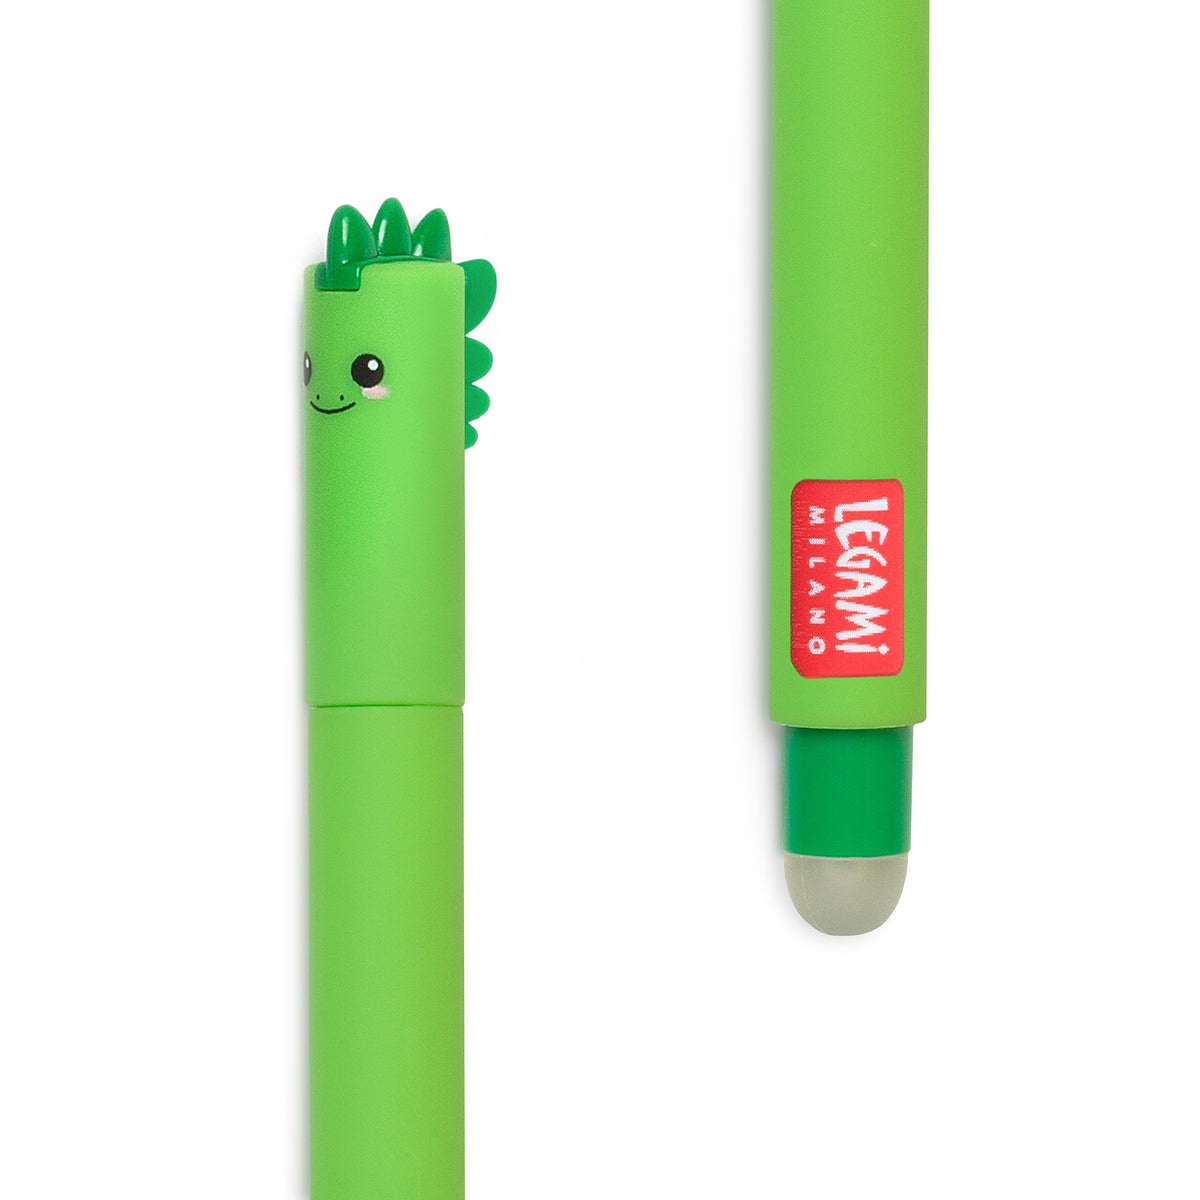 Image of an erasable pen lid and rubber in the shape of a dinosaur.